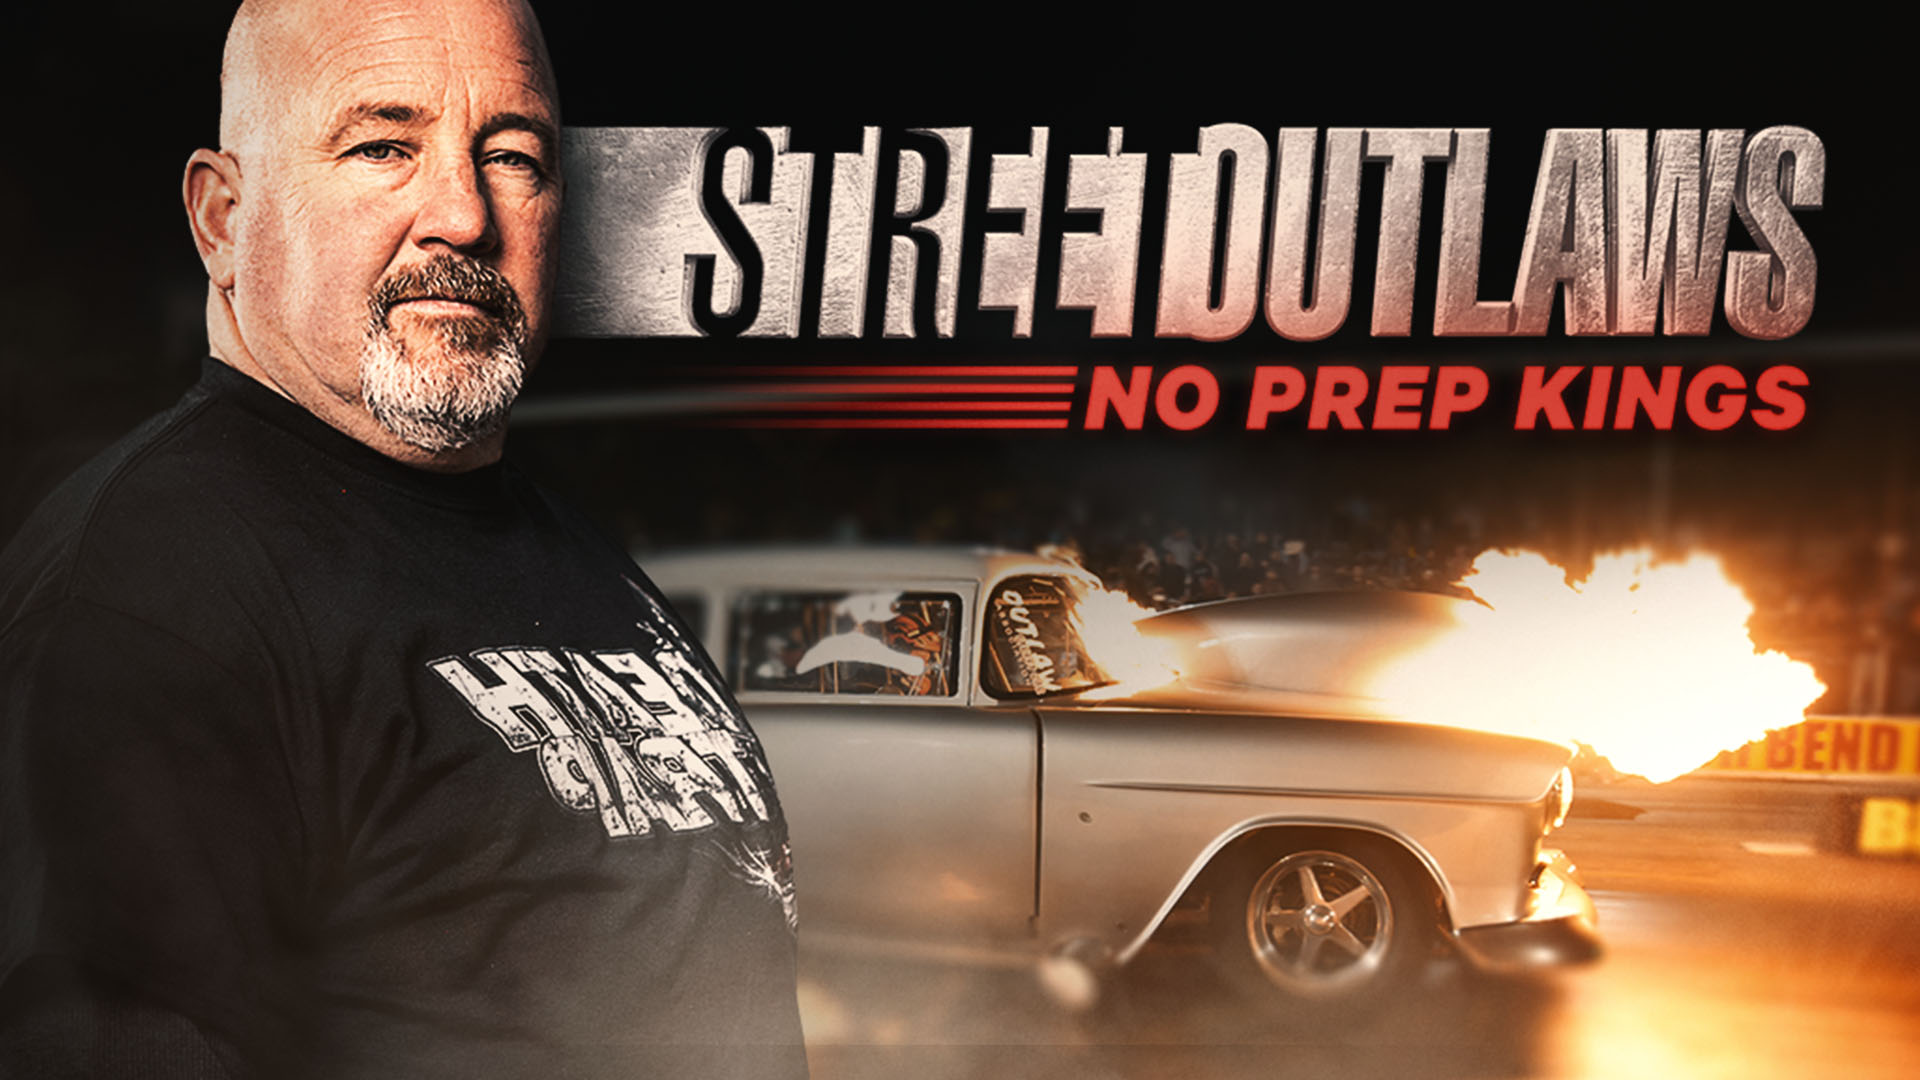 Watch Street Outlaws No Prep Kings live or ondemand Freeview Australia